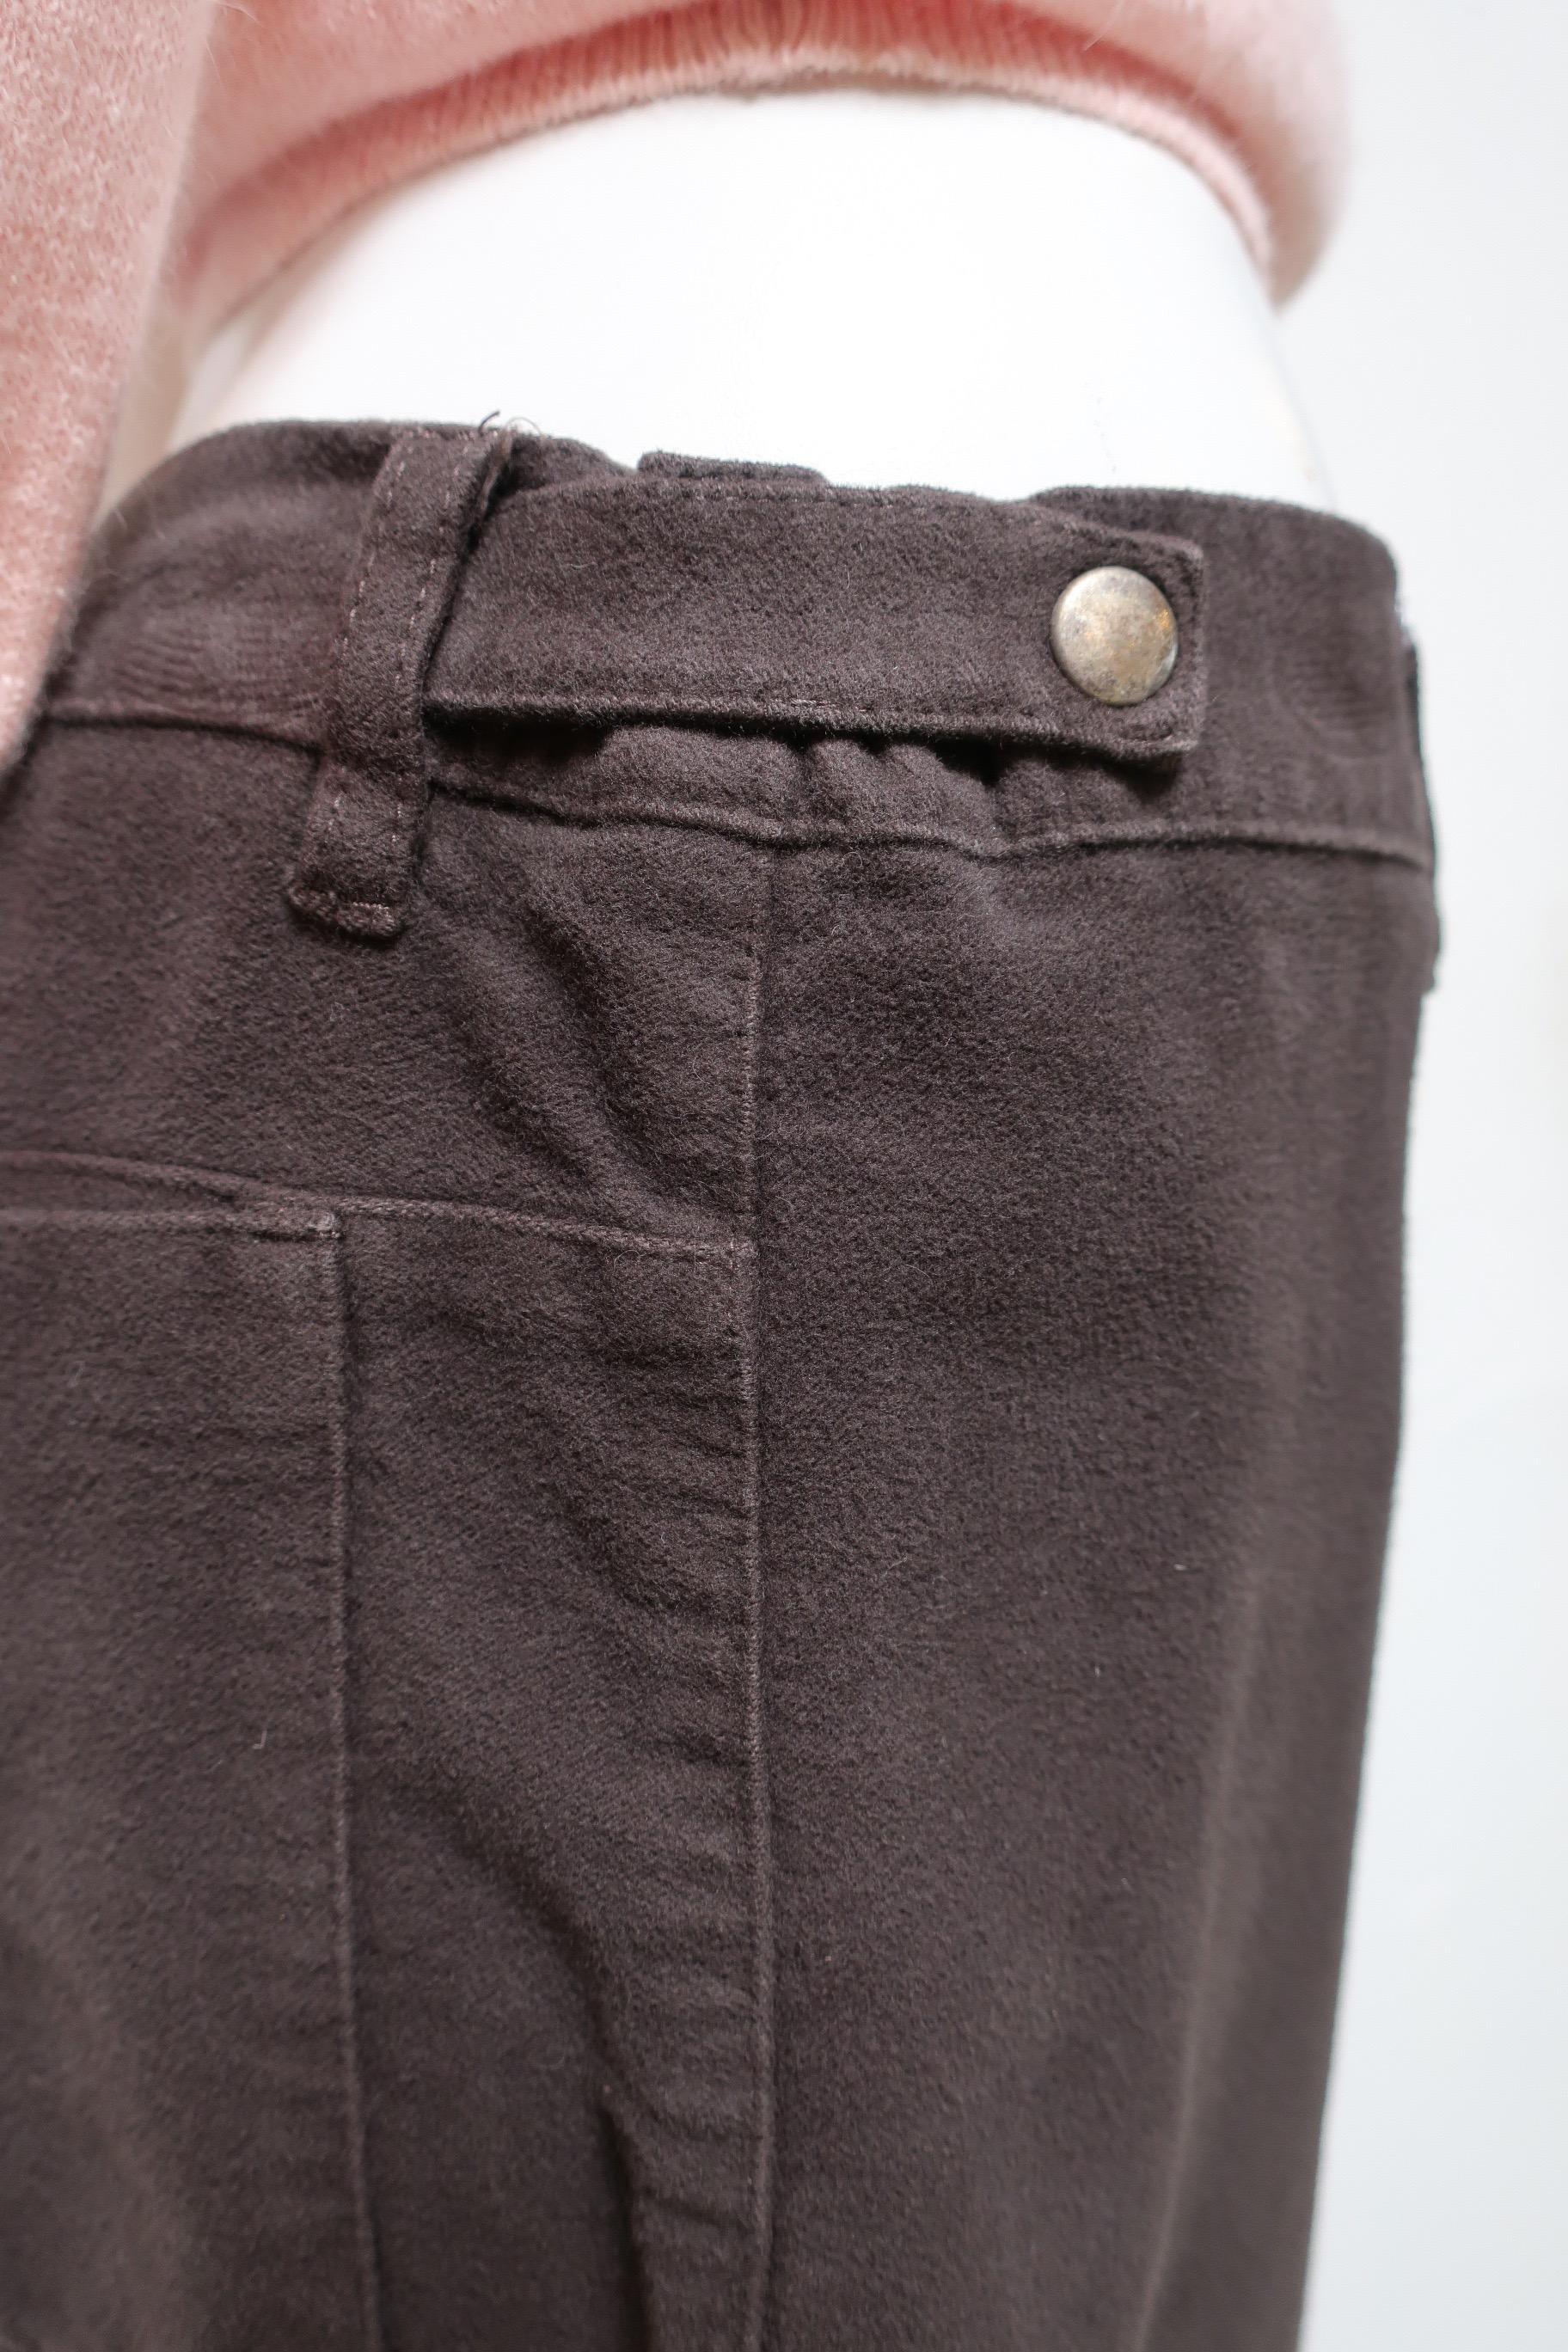 Maison Martin Margiela Brown Flannel Pant In New Condition For Sale In Laguna Beach, CA